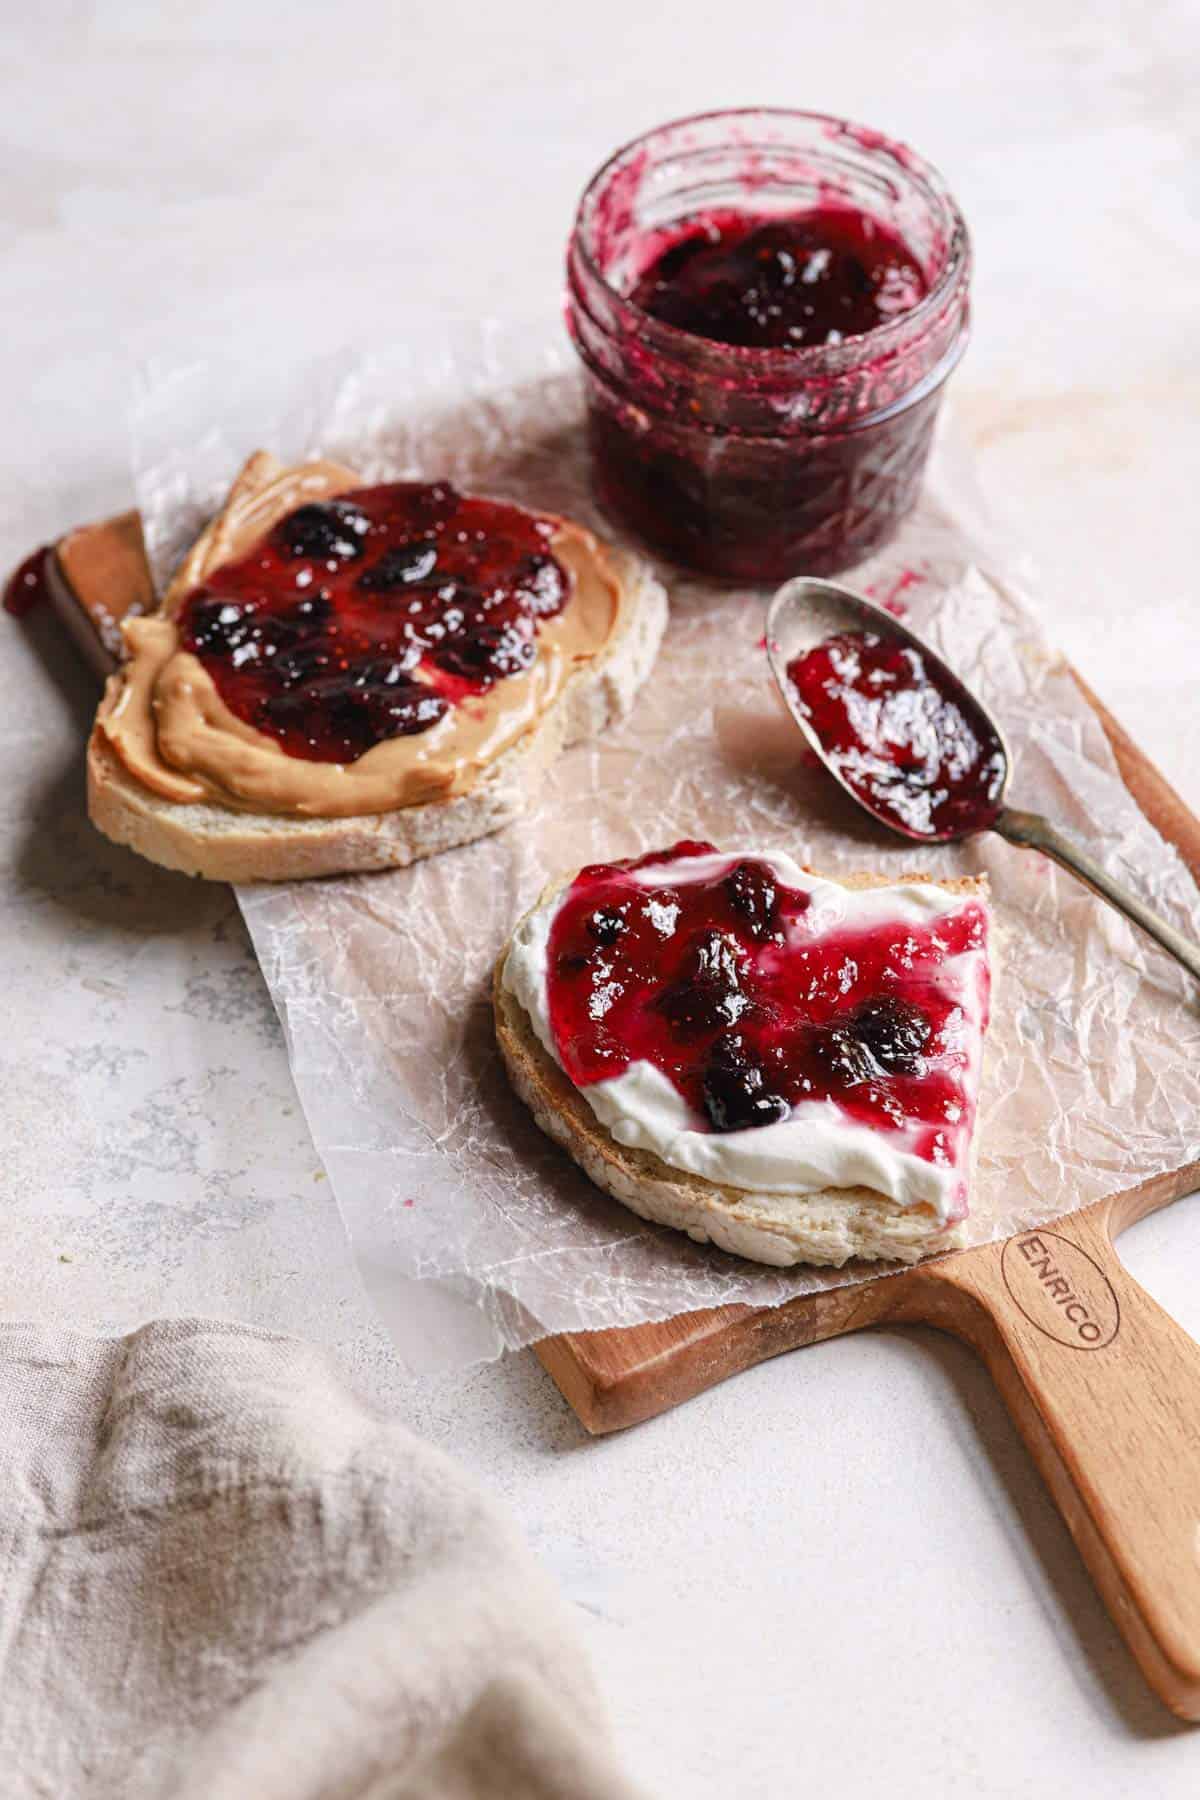 Slices of bread on a cutting board topped with parchment paper and two slices of bread topped with blueberry jam and a jar of jam in the back right corner of the cutting board.